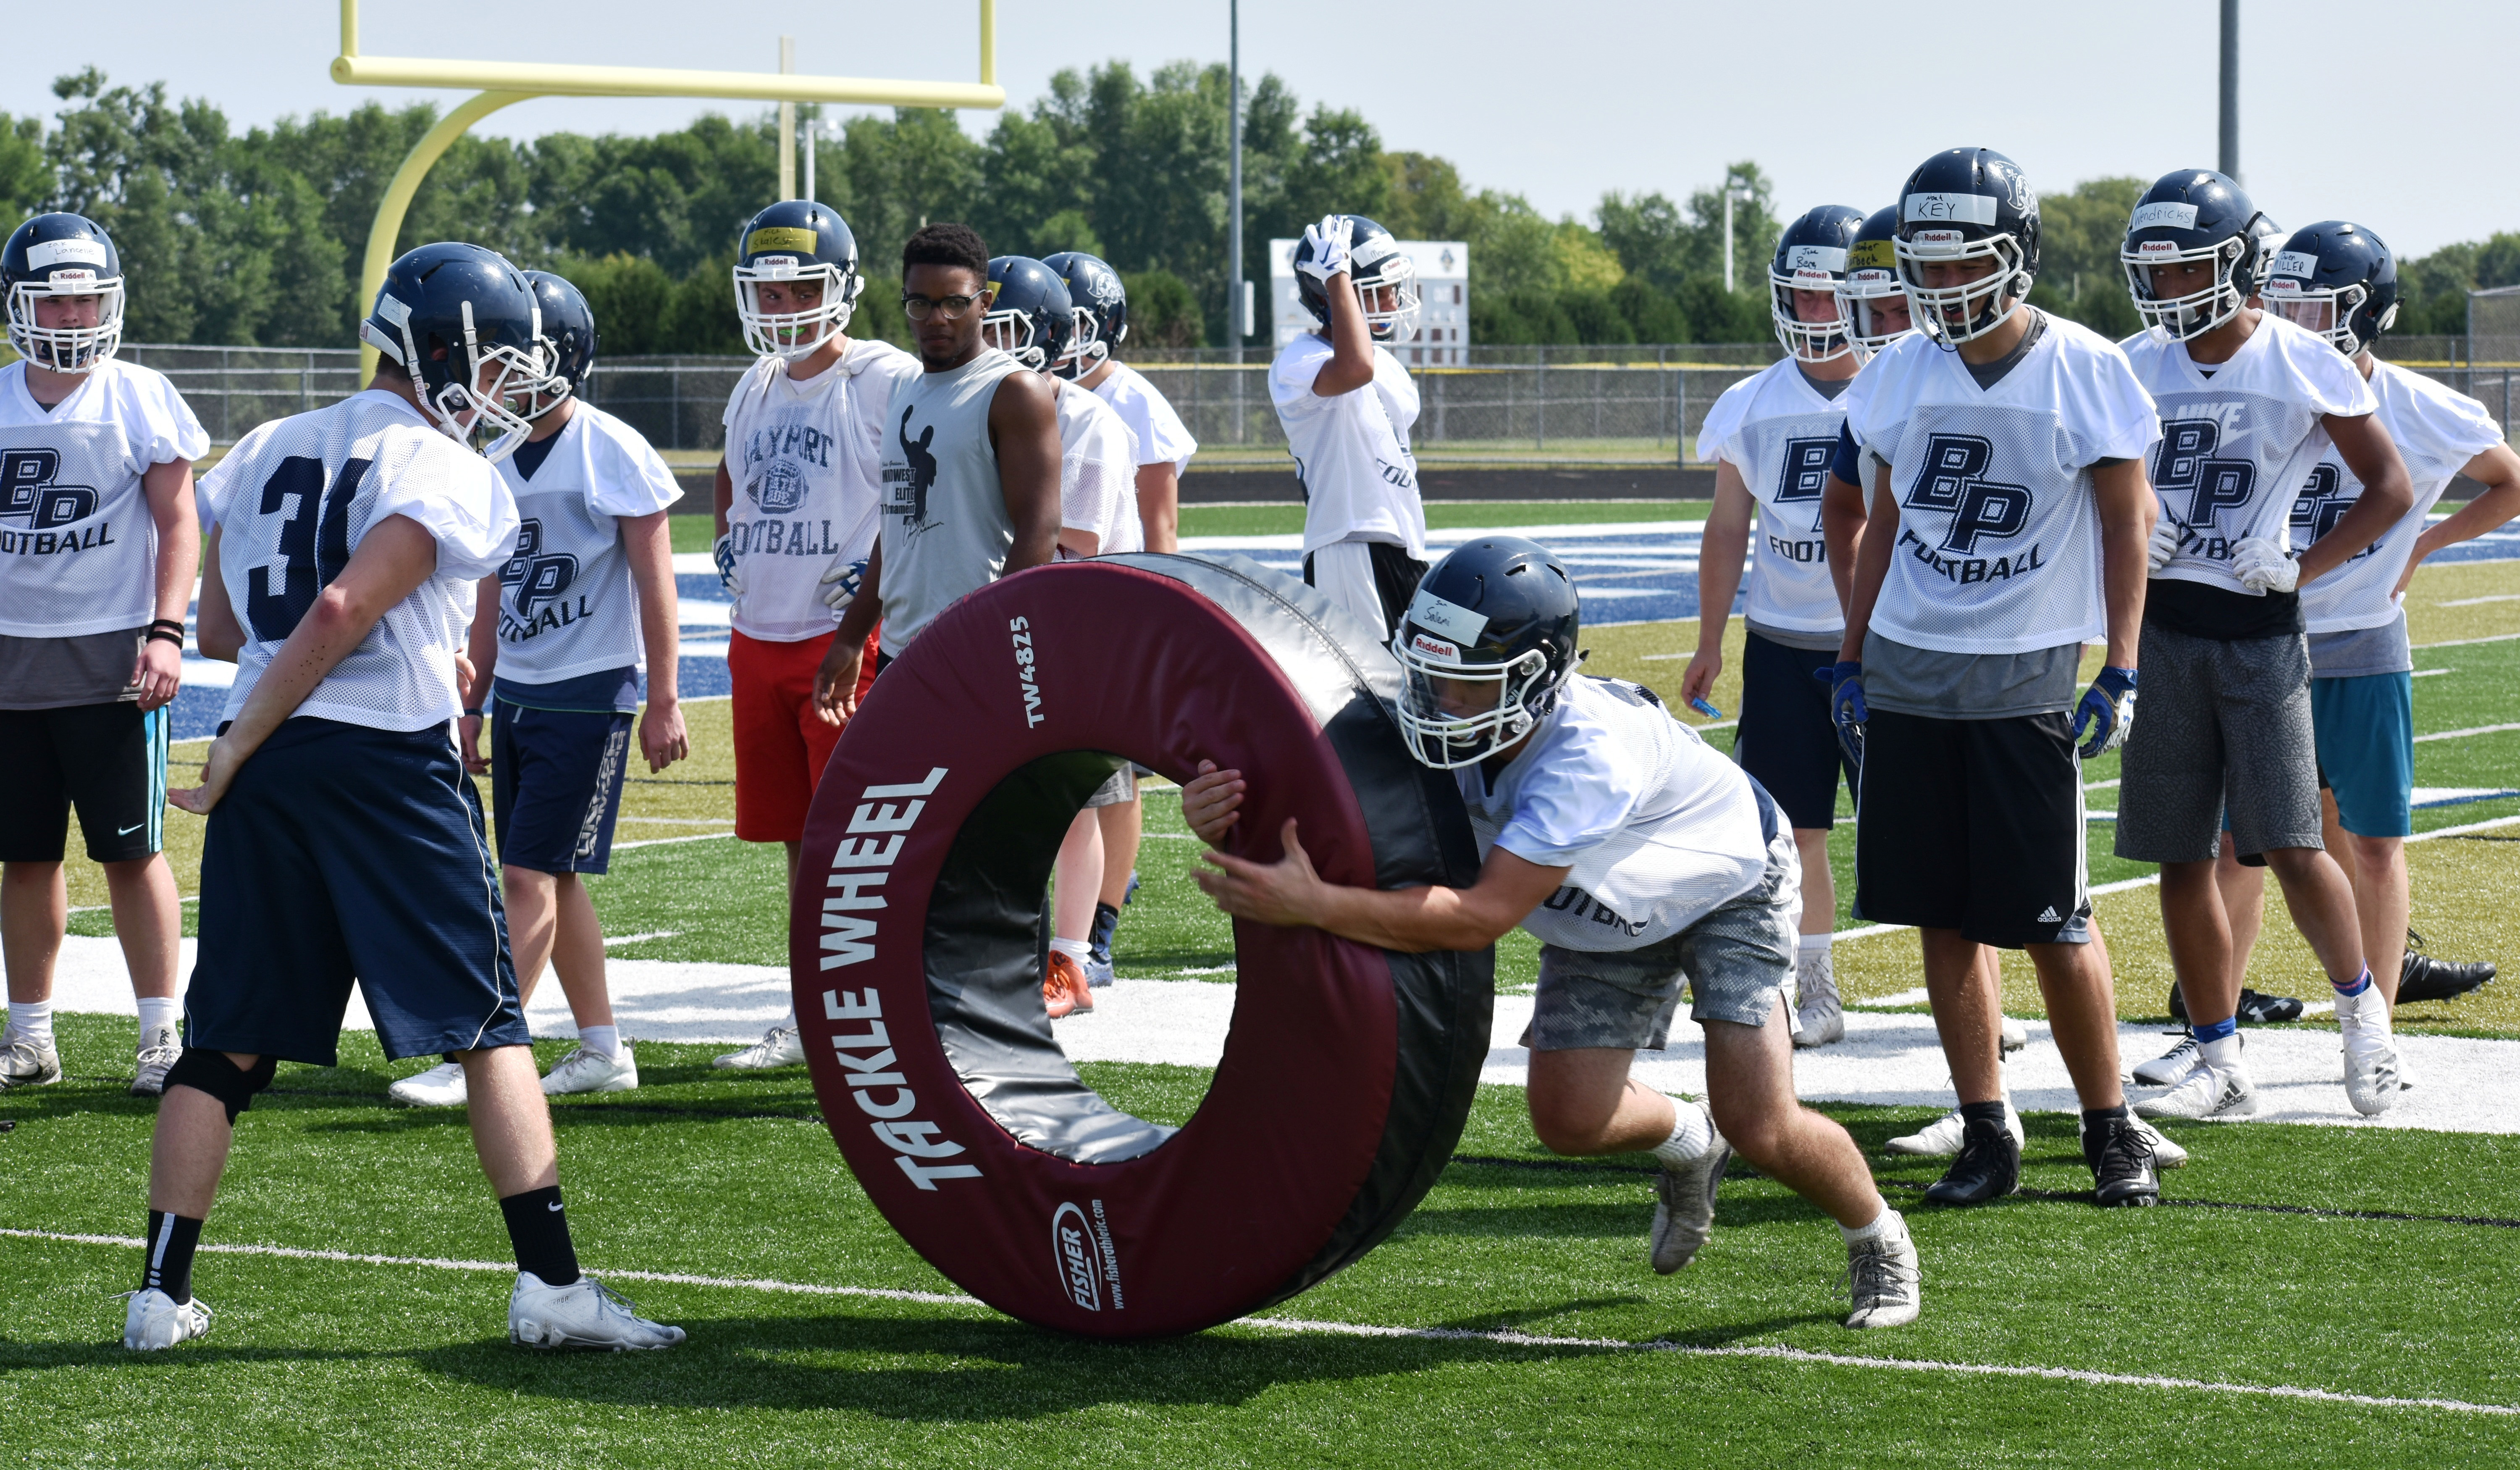 Aiming for another: Bay Port football preview